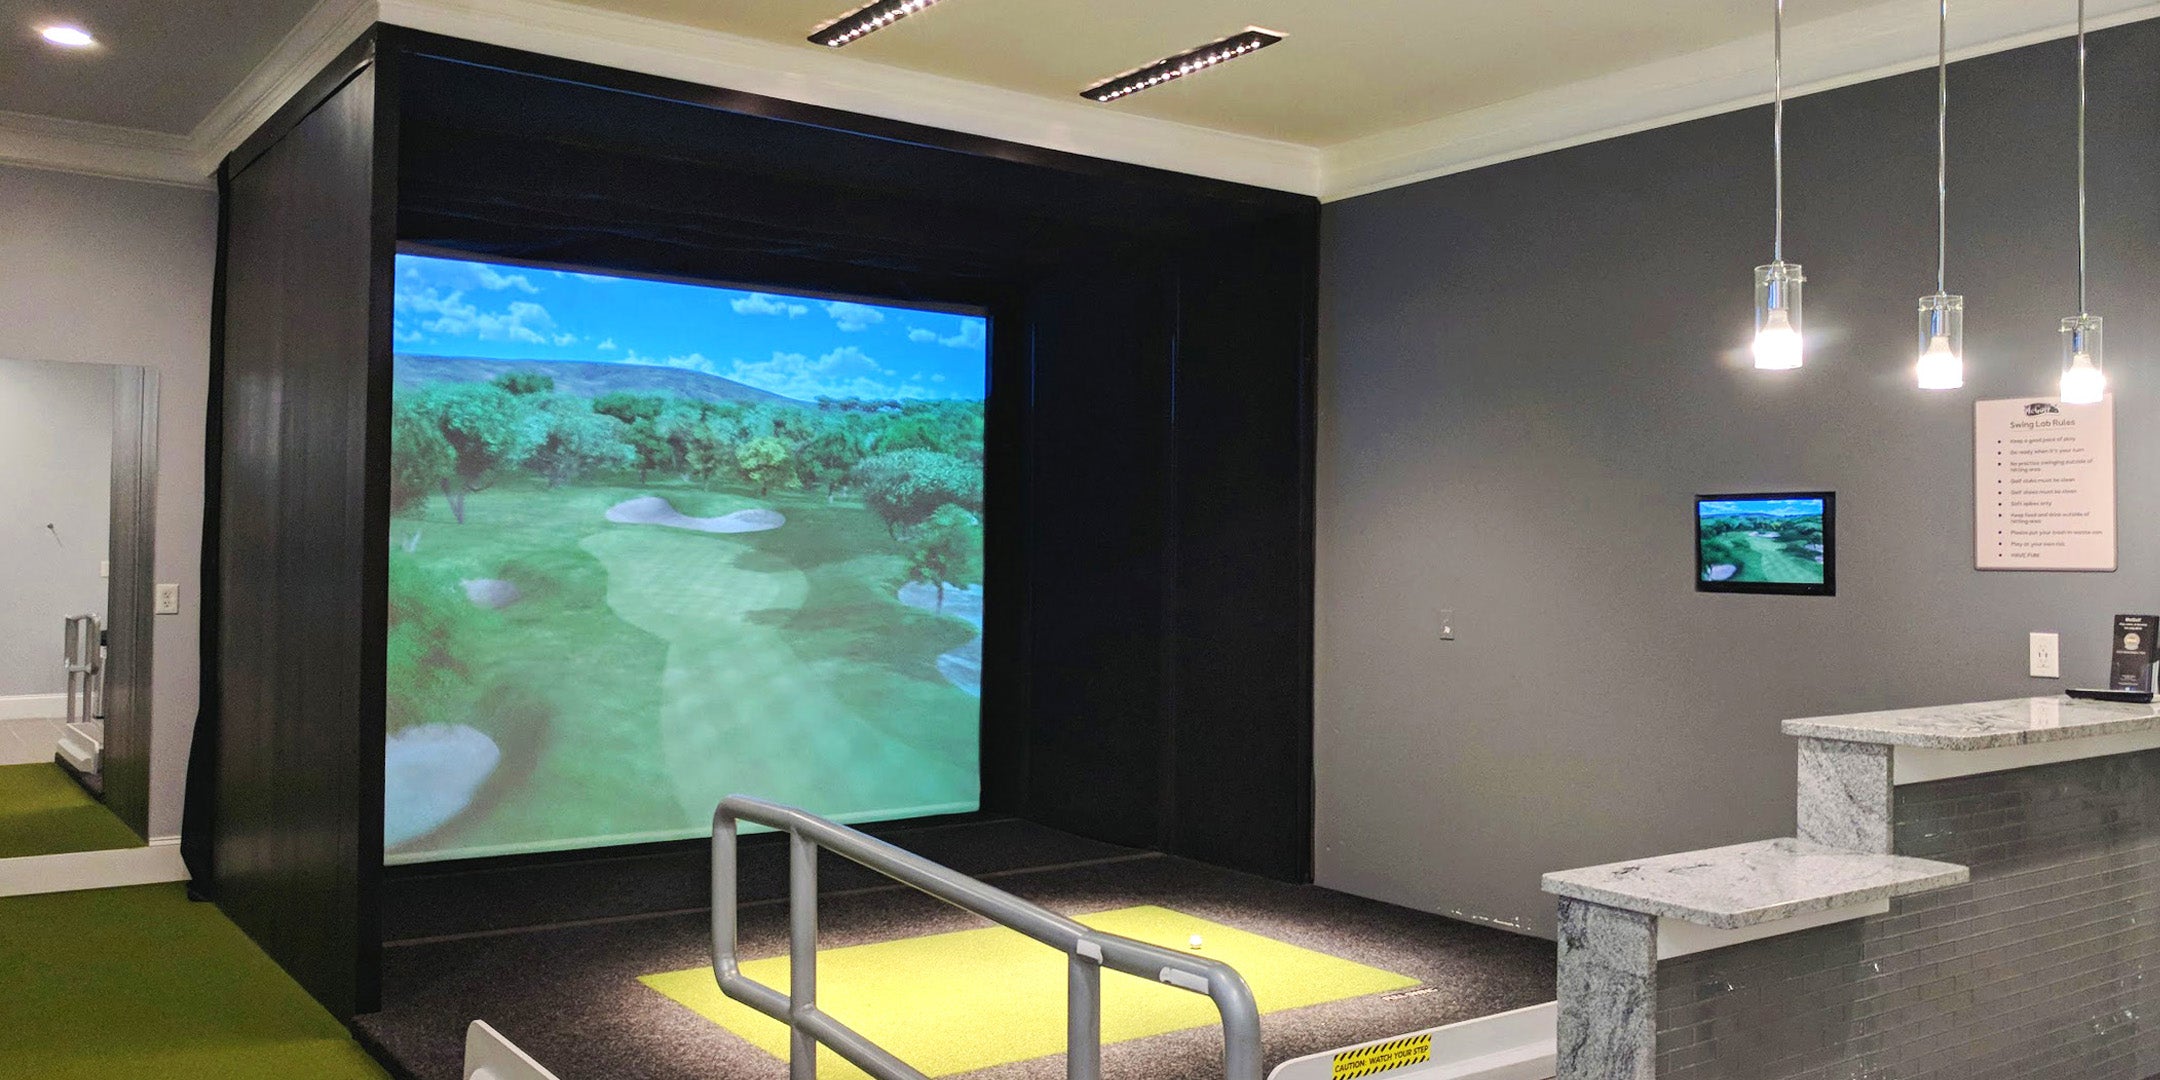 Golf simulator running in hotel or other commercial building